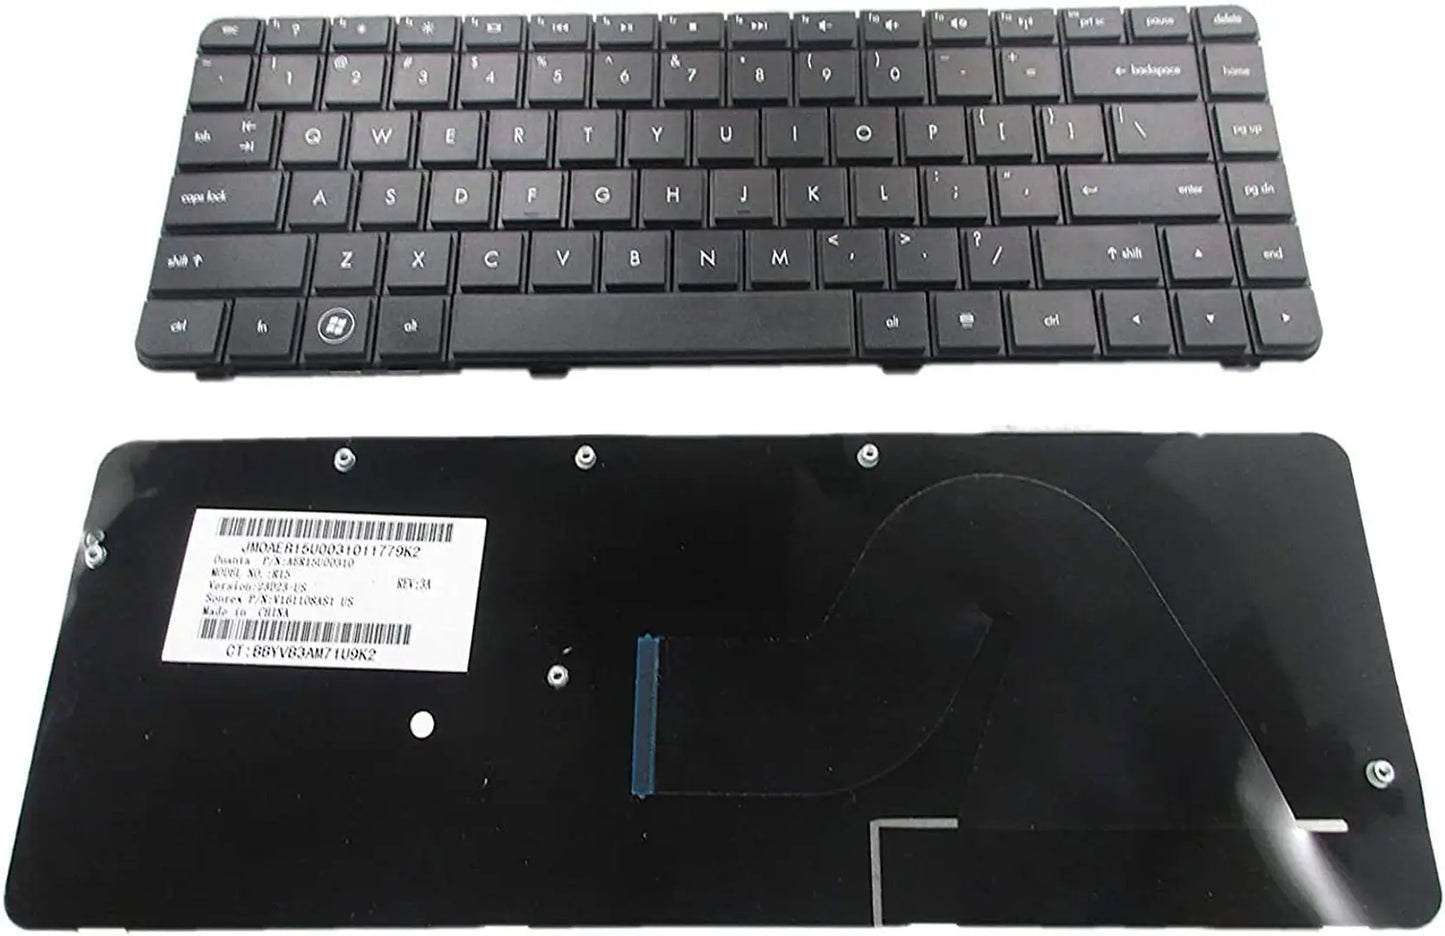 Wistar Laptop Keyboard Compatible for PresarioCQ42 CQ42-100 CQ42-200 G42 G42-300 G42-410US G42-164LA G42-224CA G42-228CA G42-415DX G42-232NR